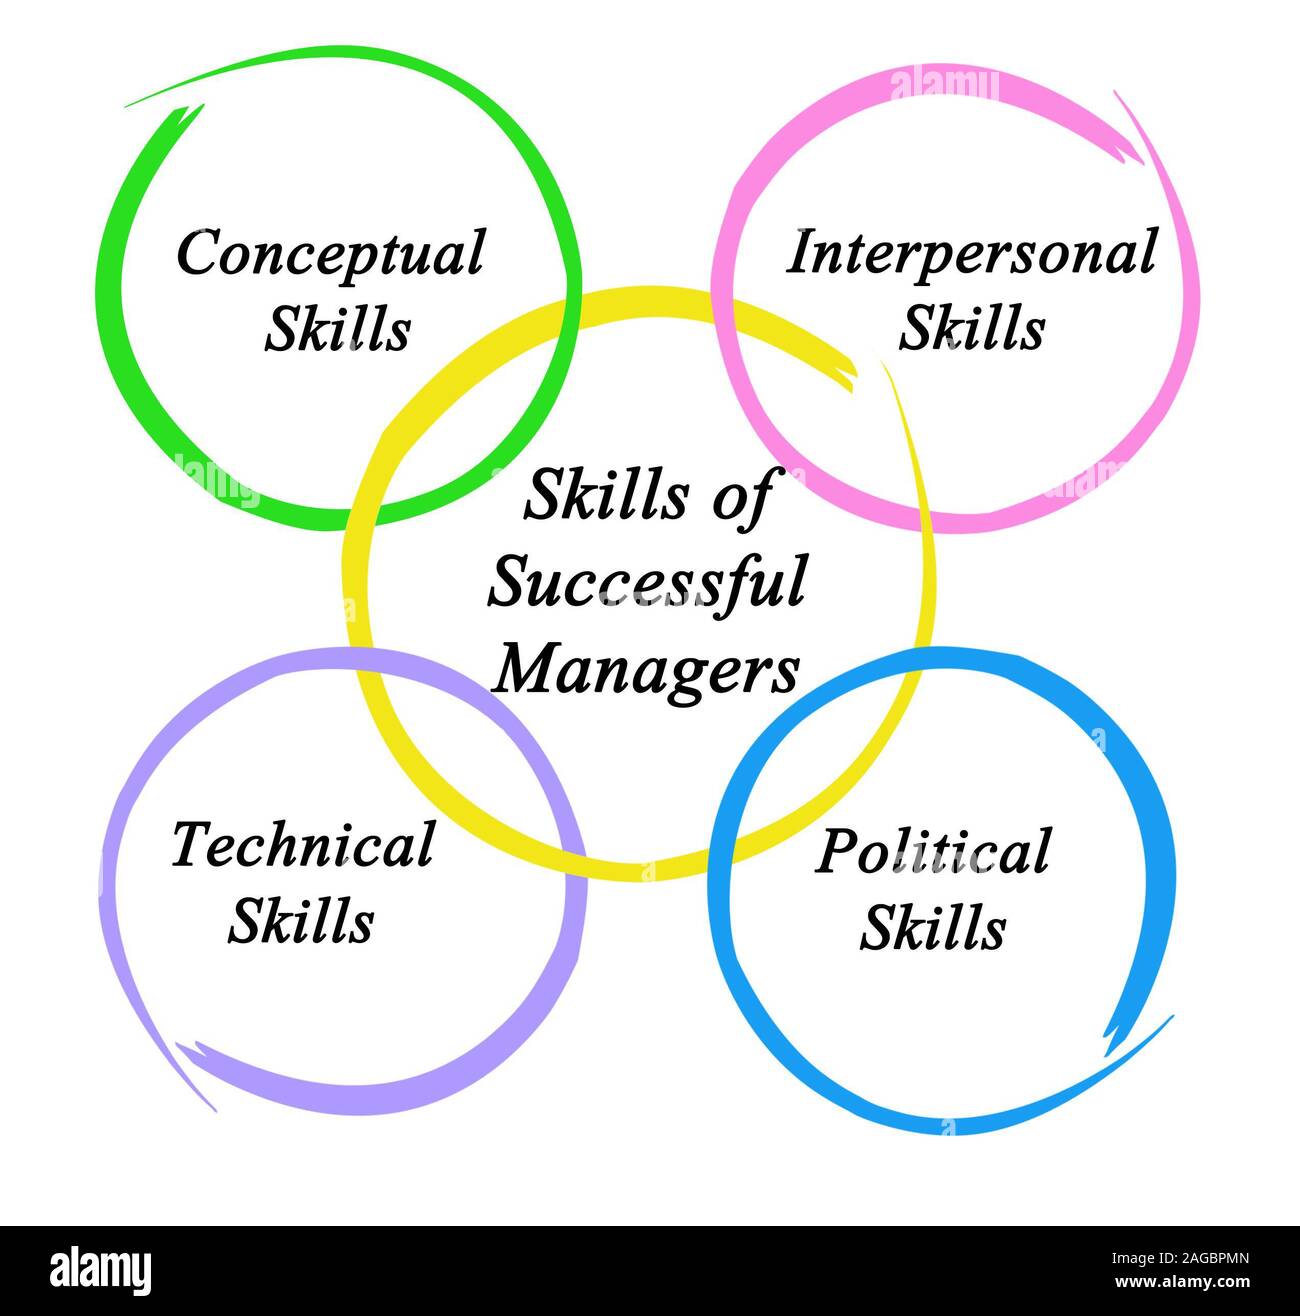 Skills of Successful Managers Stock Photo